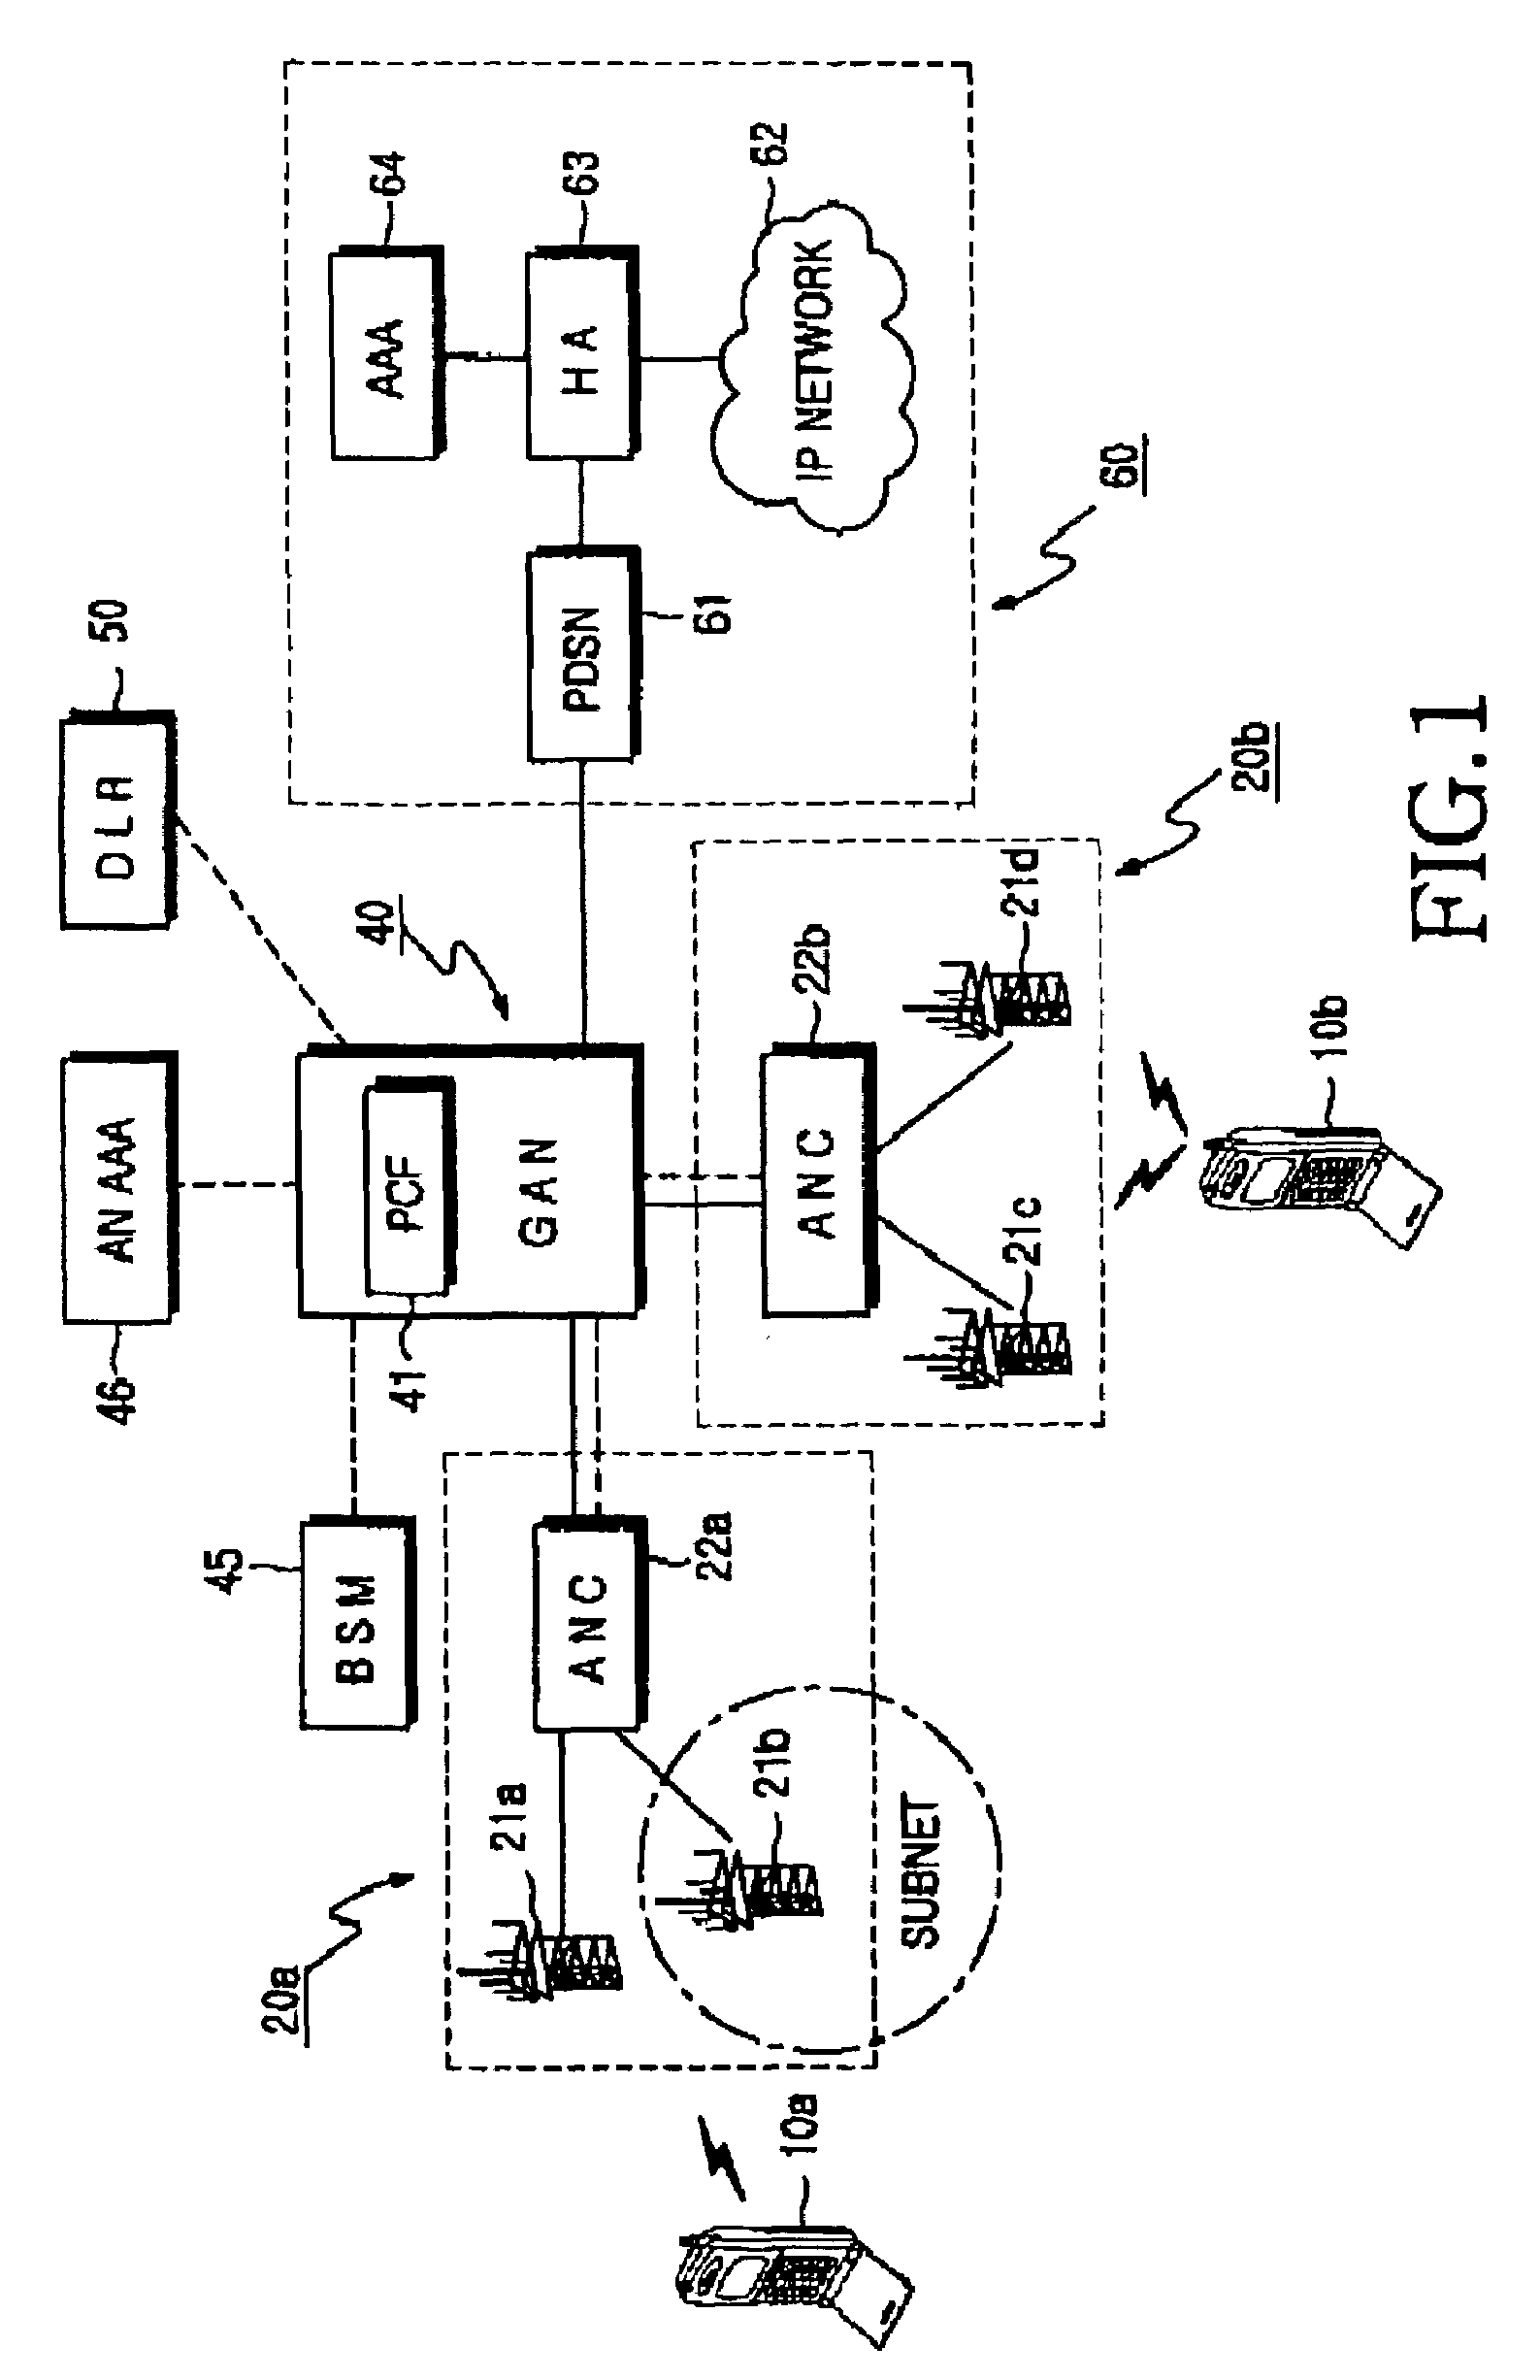 Signaling method for paging in a mobile communication system for high-speed packet data transmission